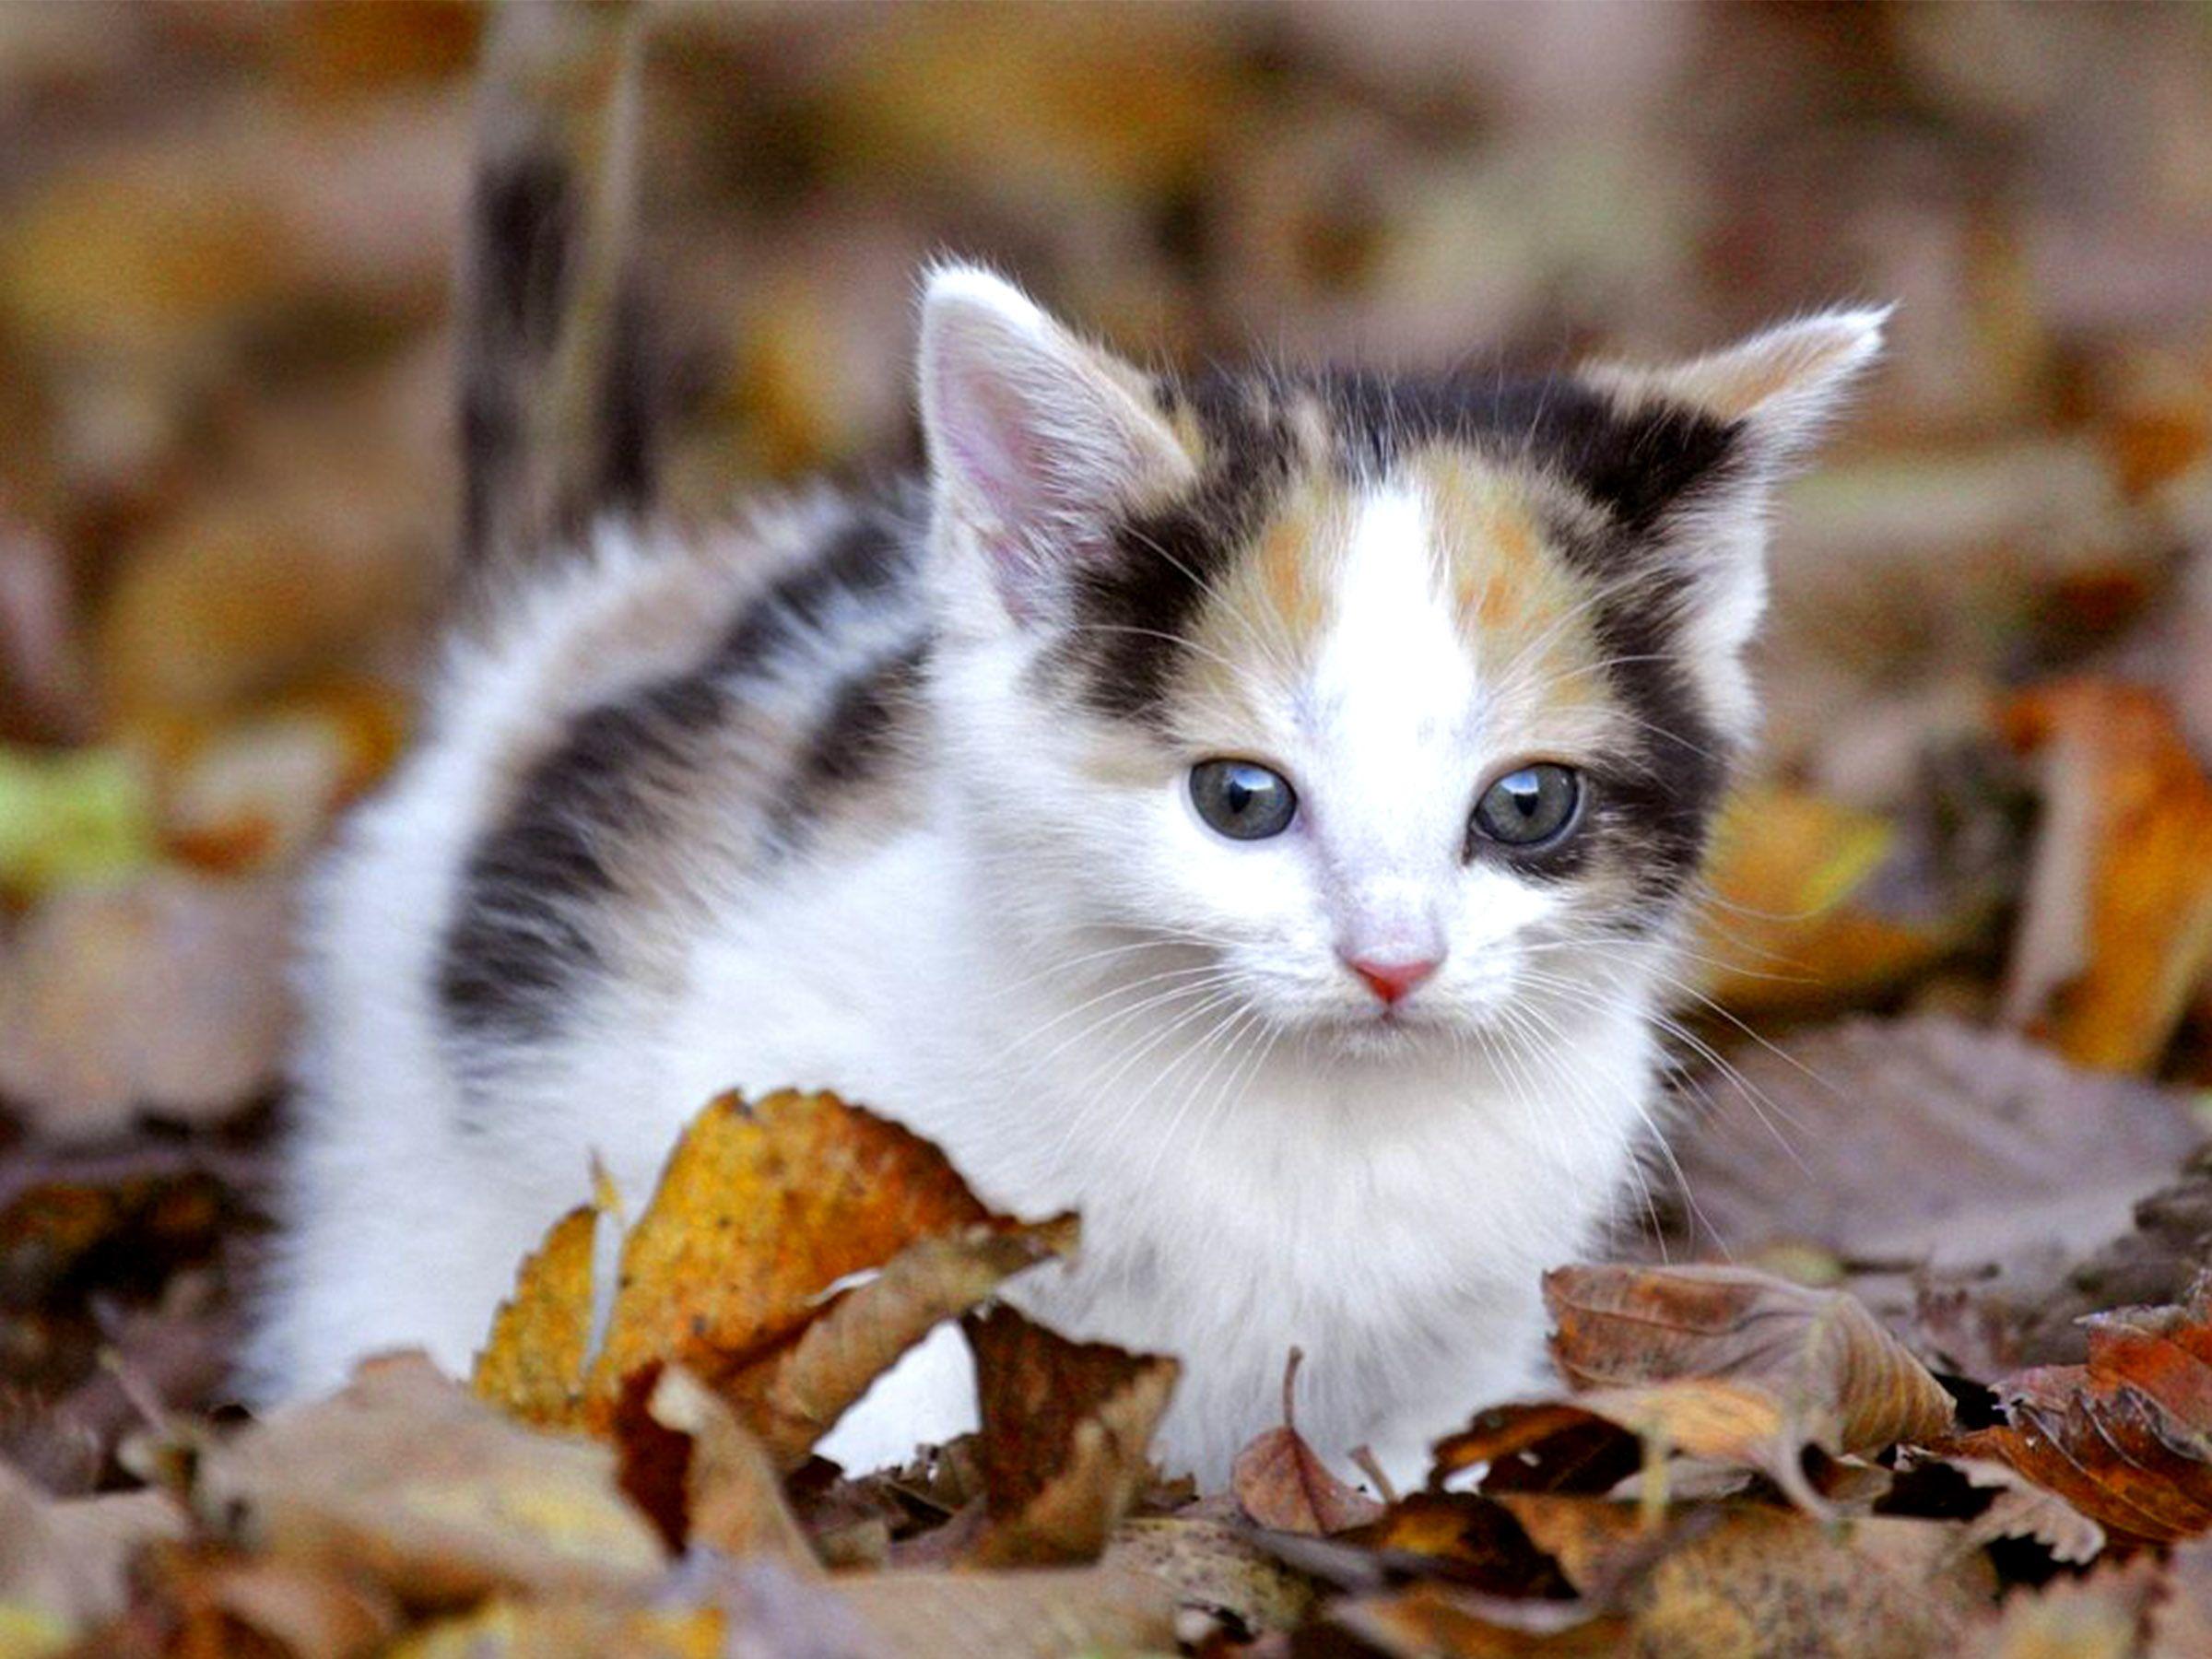 Cute Cats And Kittens Wallpapers Top Free Cute Cats And Kittens Images, Photos, Reviews